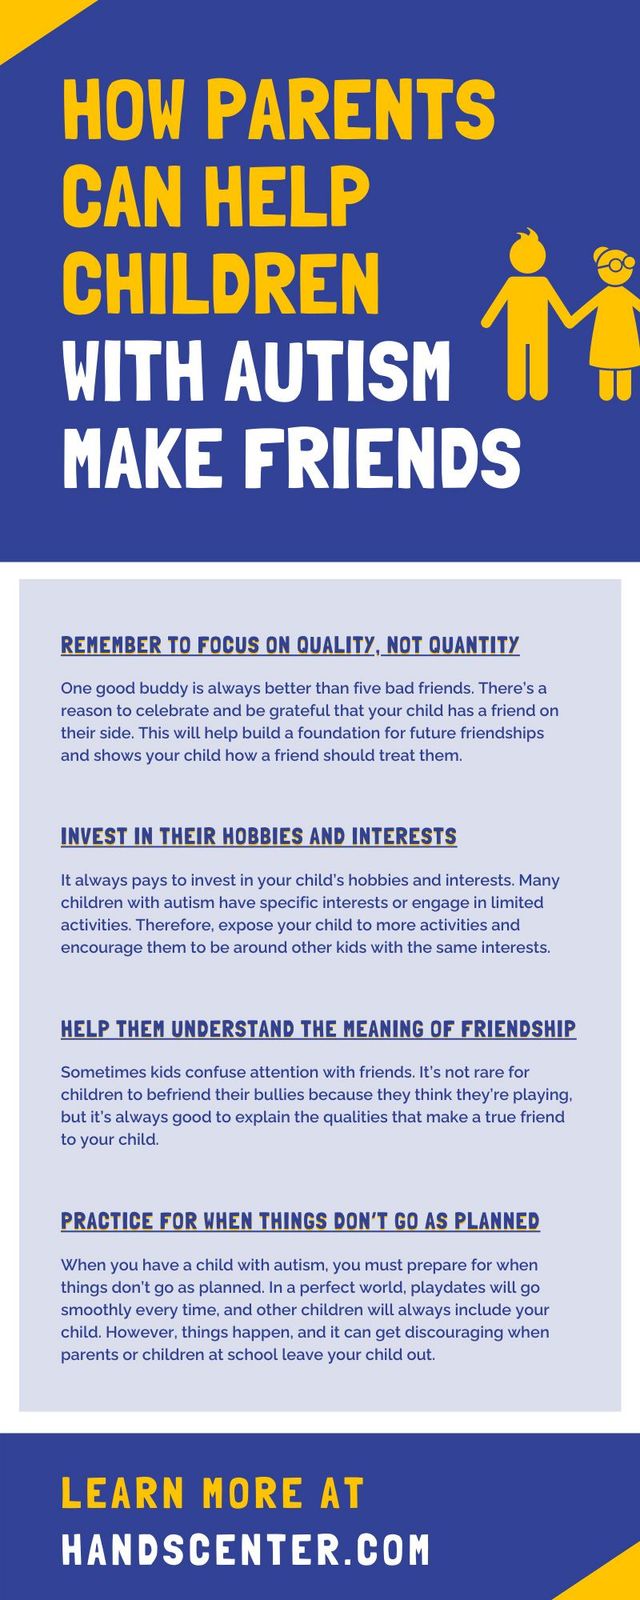 Tips to Help Kids Be Friendly To Everyone